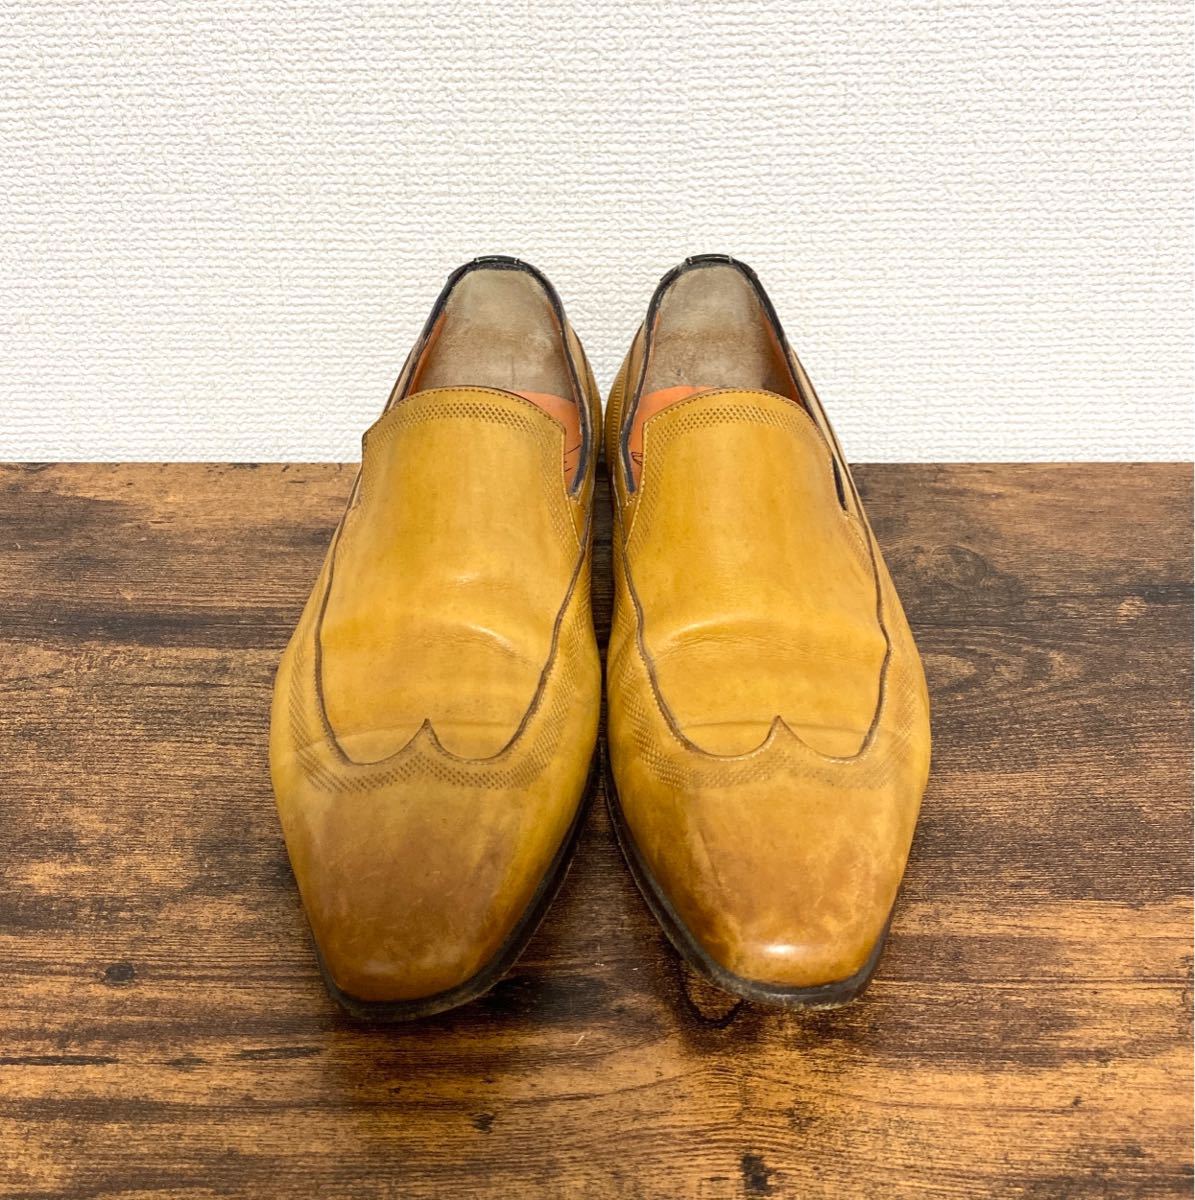  sun to-niSantoni slip-on shoes wing chip size/5 yellow beige 